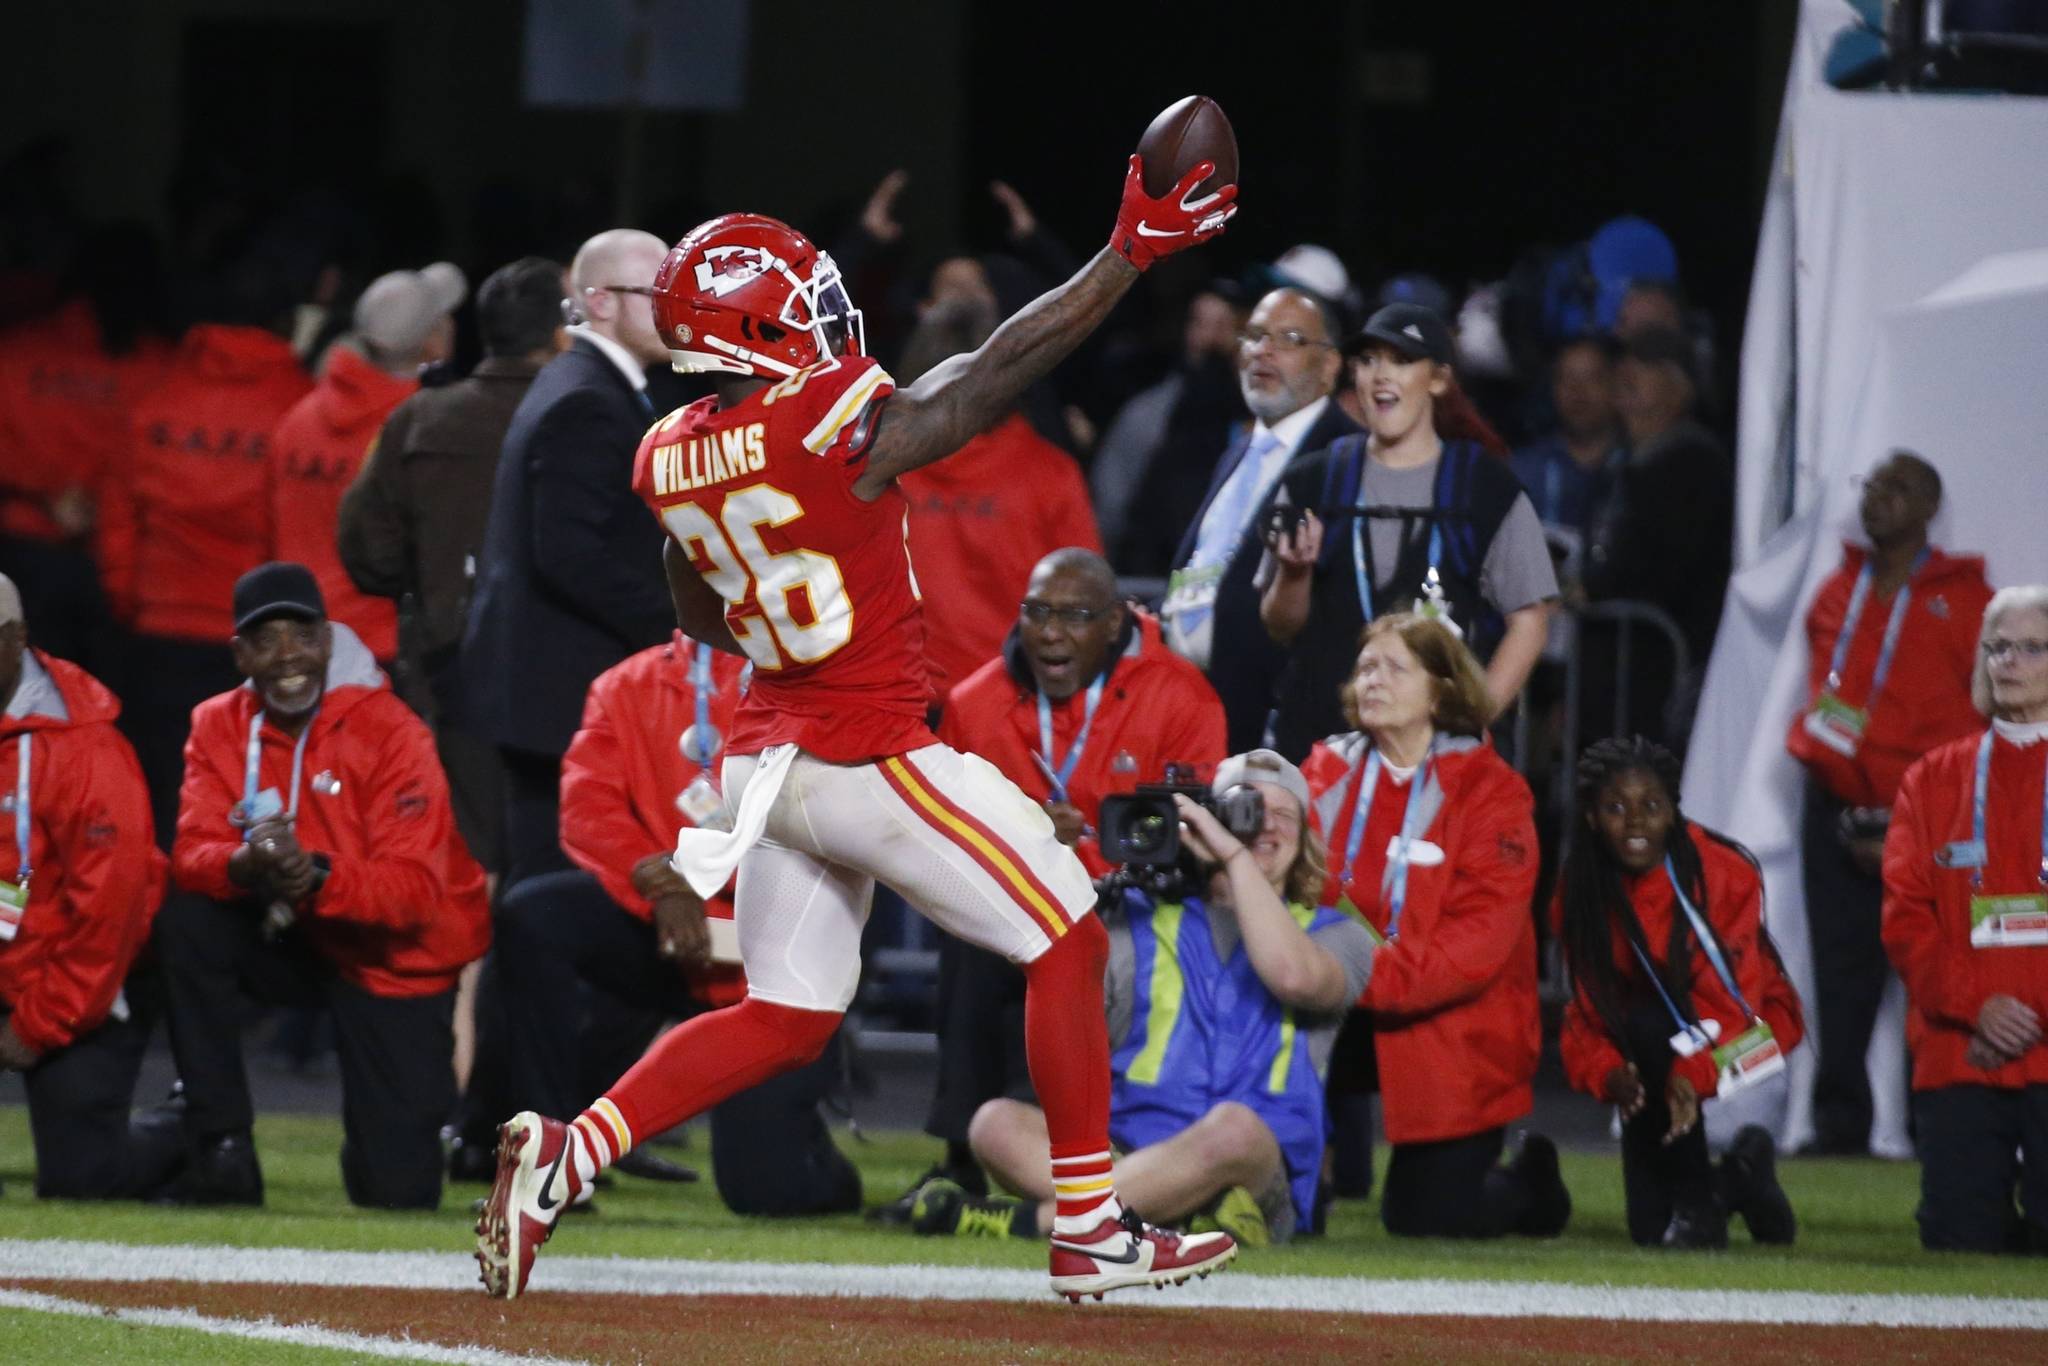 The Kansas City Chiefs Waited 50 Years for This Super Bowl Date